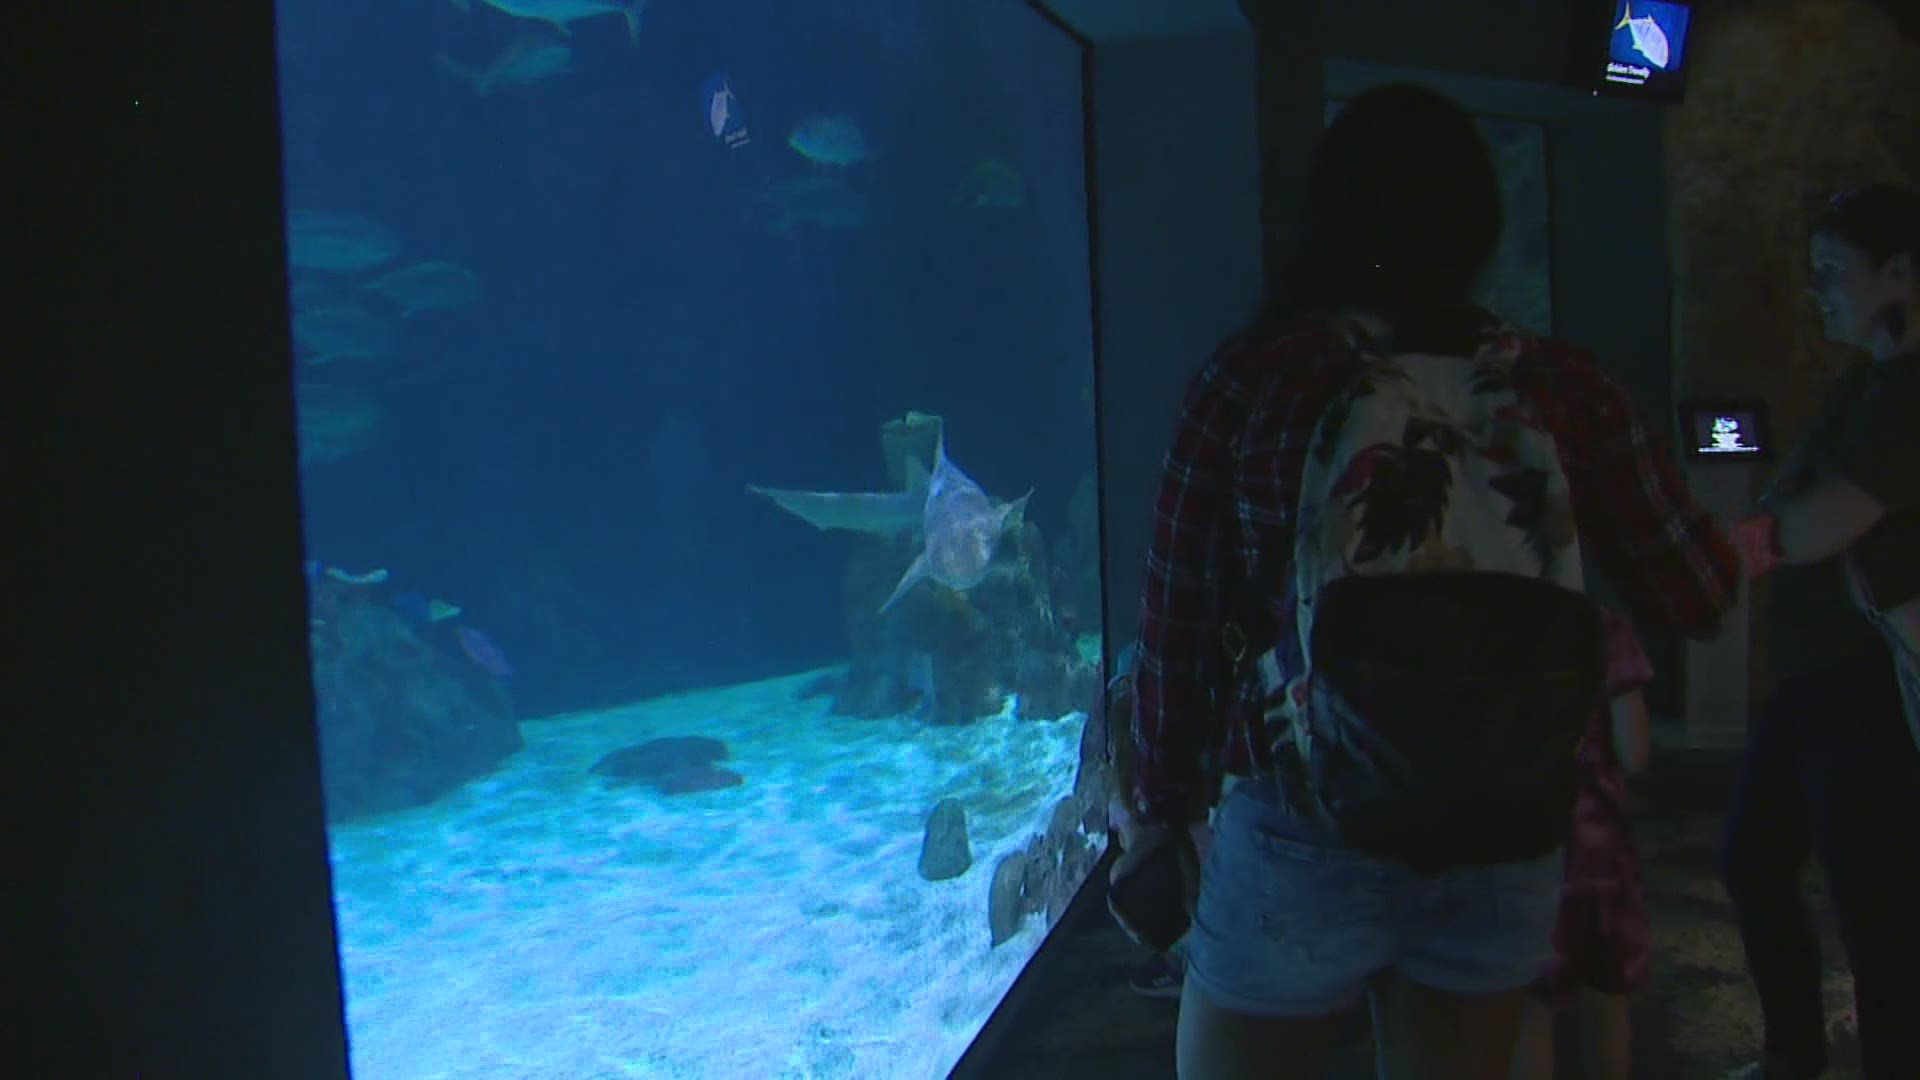 Now that Washington is open, workers at the Point Defiance Zoo and Aquarium hope to spread awareness about the need to protect marine life in Puget Sound.